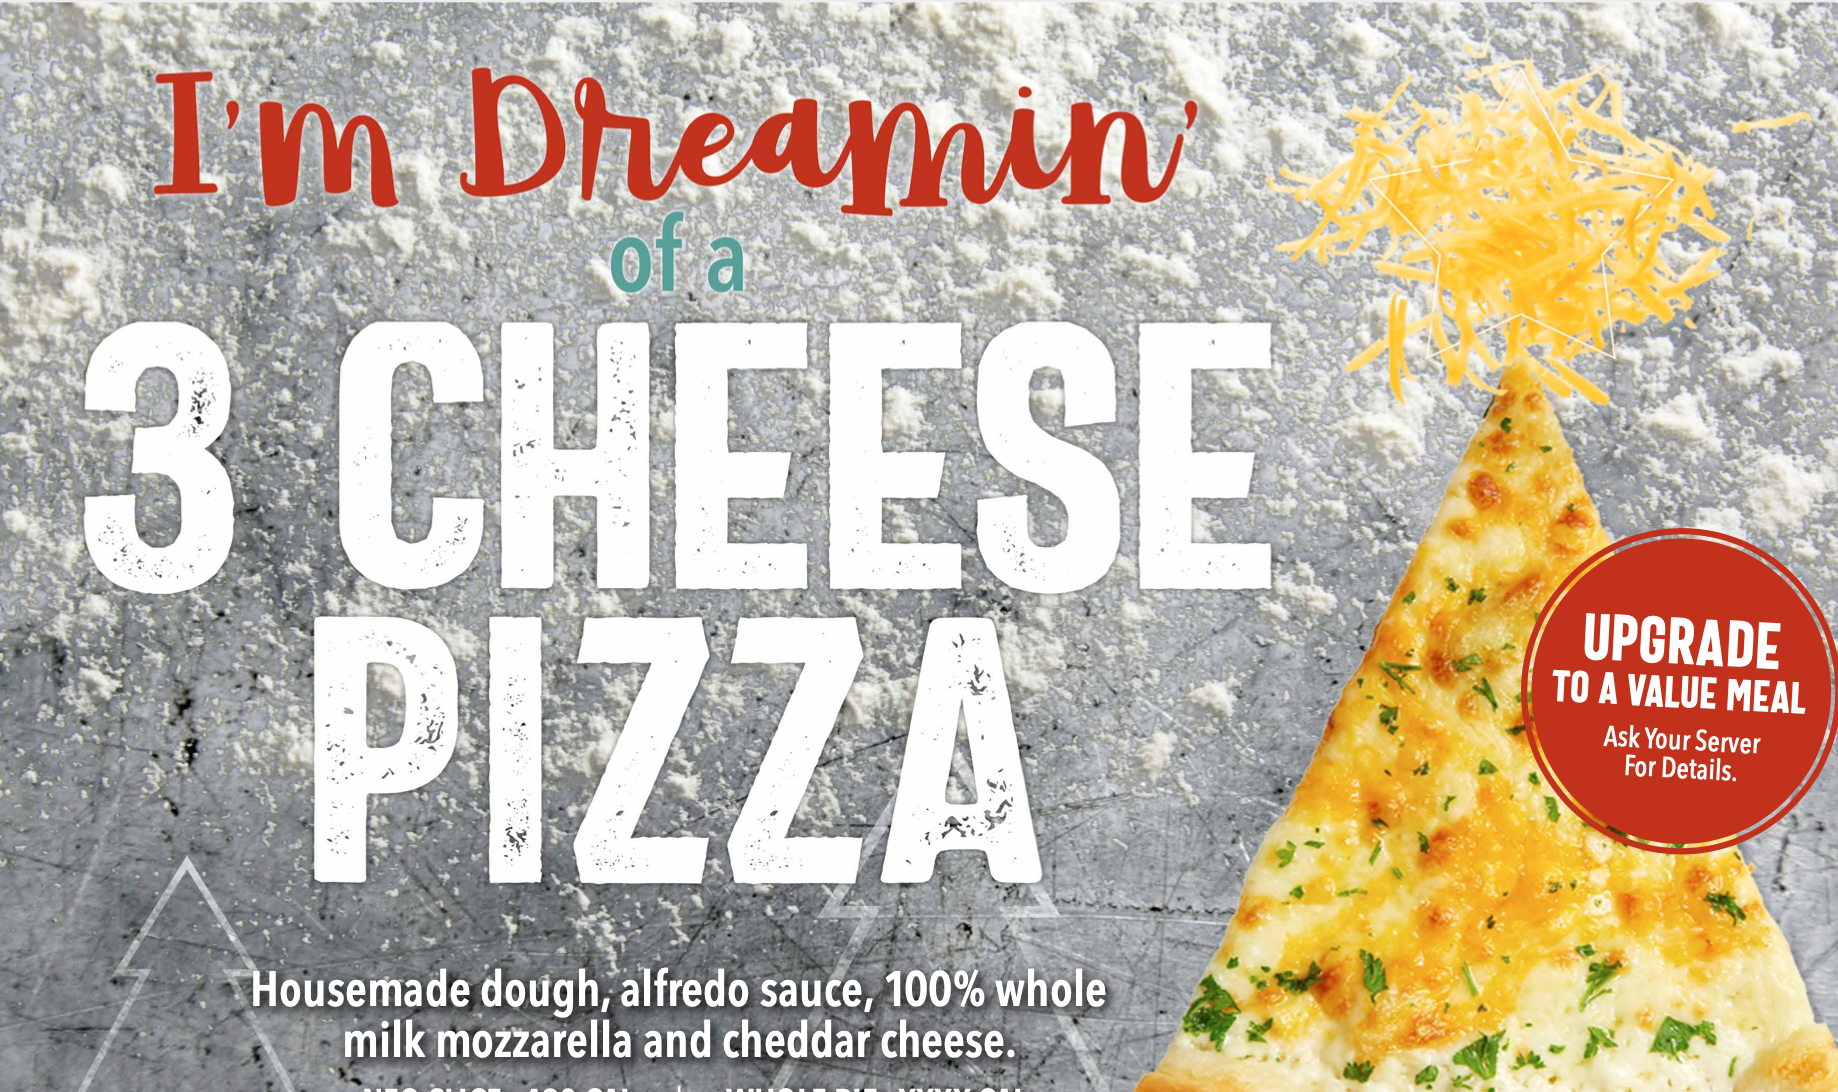 I’m Dreamin’ of a 3 Cheese Pizza menuboard artwork (pizza slice is upside down on a stick, to look like a xmas tree)